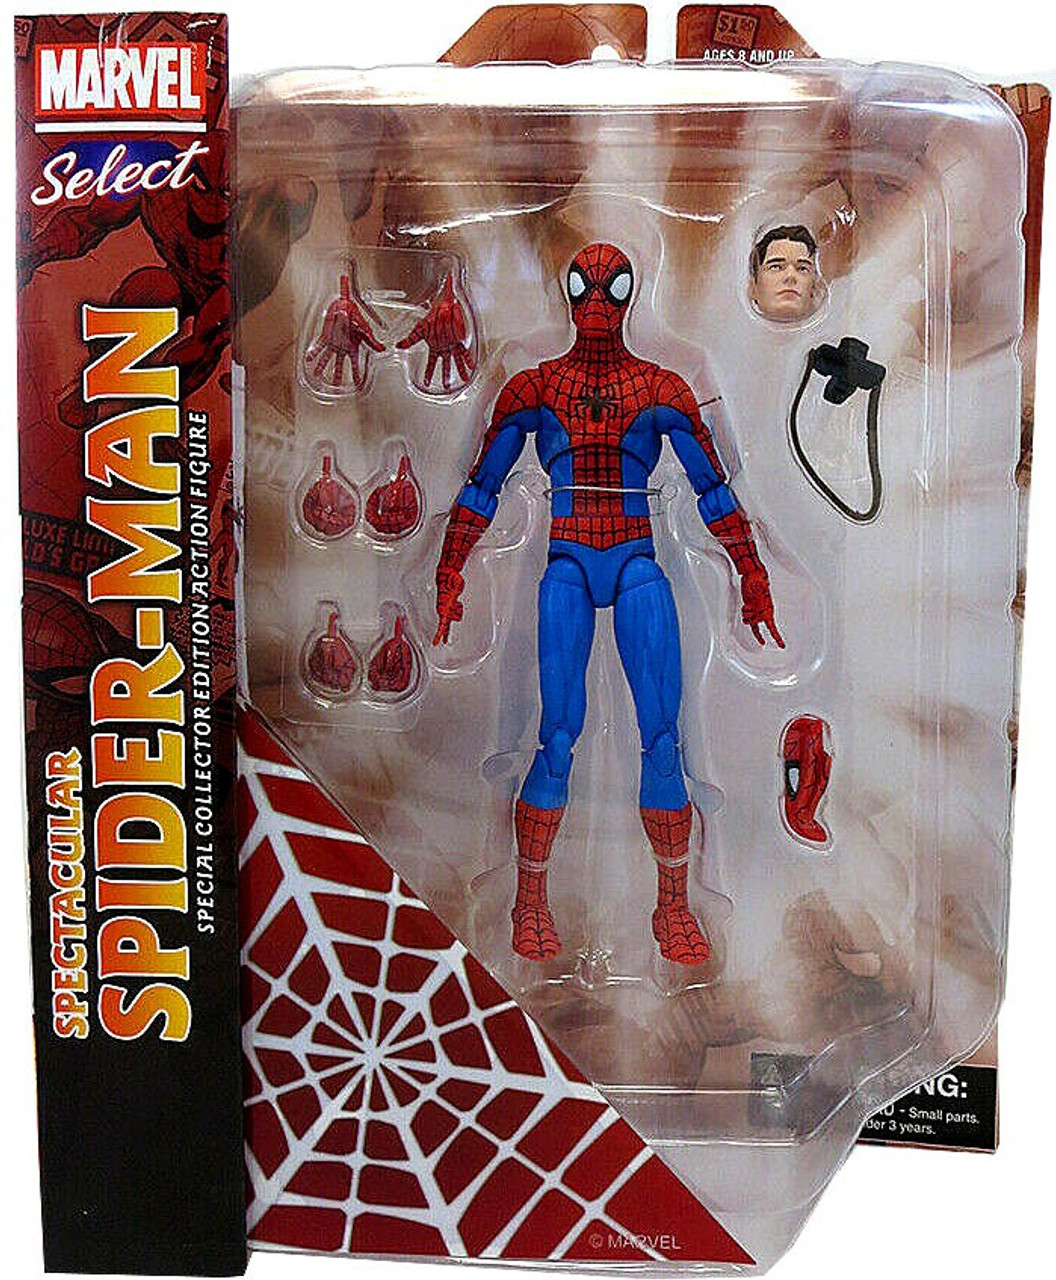 Marvel Marvel Select Spectacular Spider-Man 7 Action Figure 7-inch ... - Aug202103  52228.1595603310